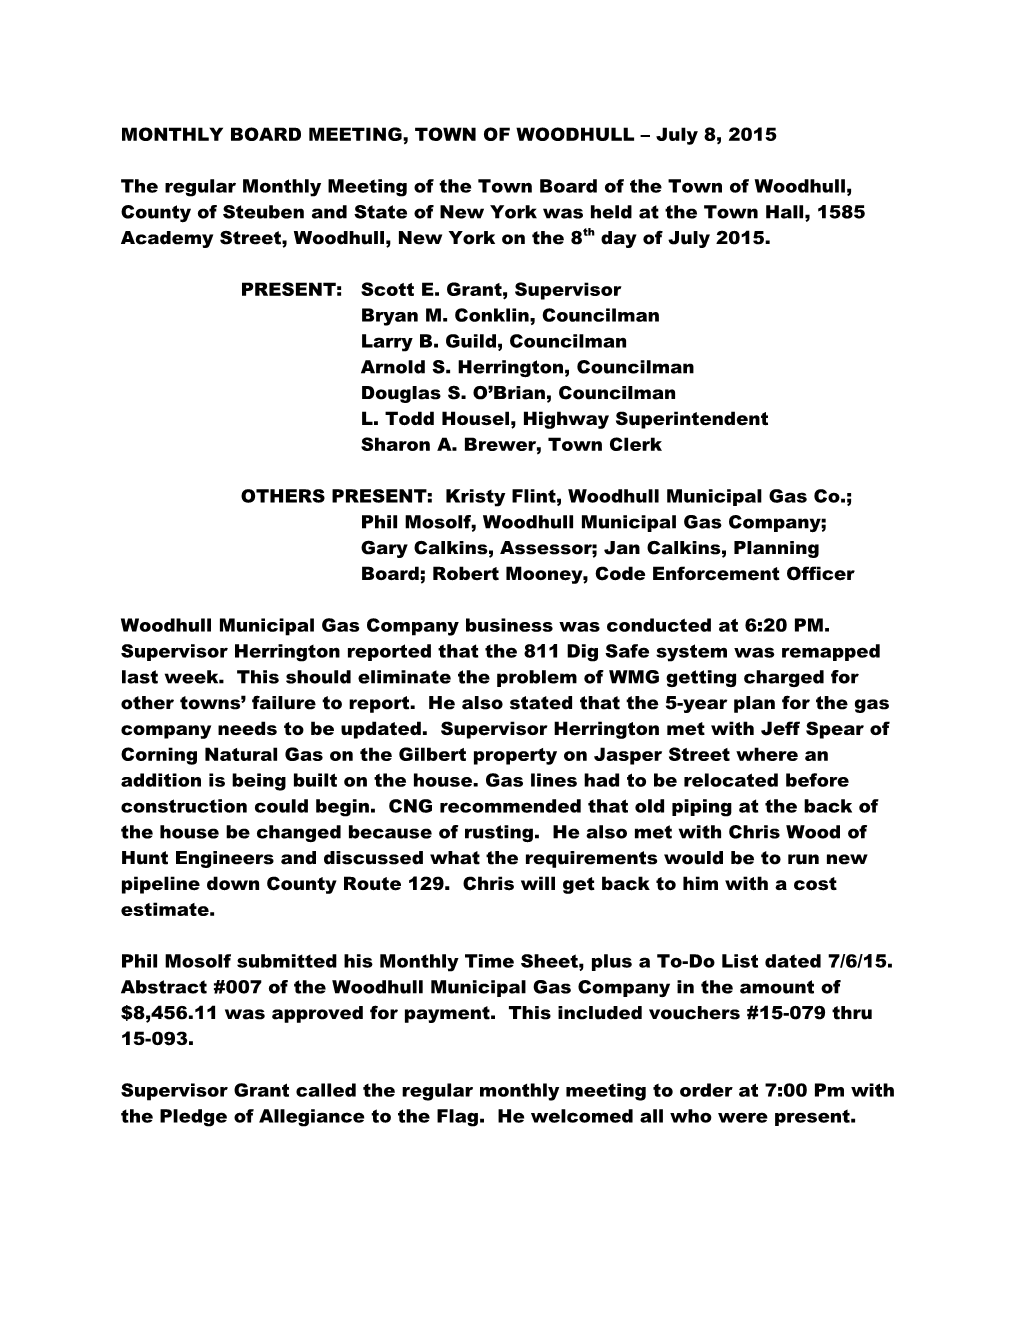 MONTHLY BOARD MEETING, TOWN of WOODHULL July 8, 2015